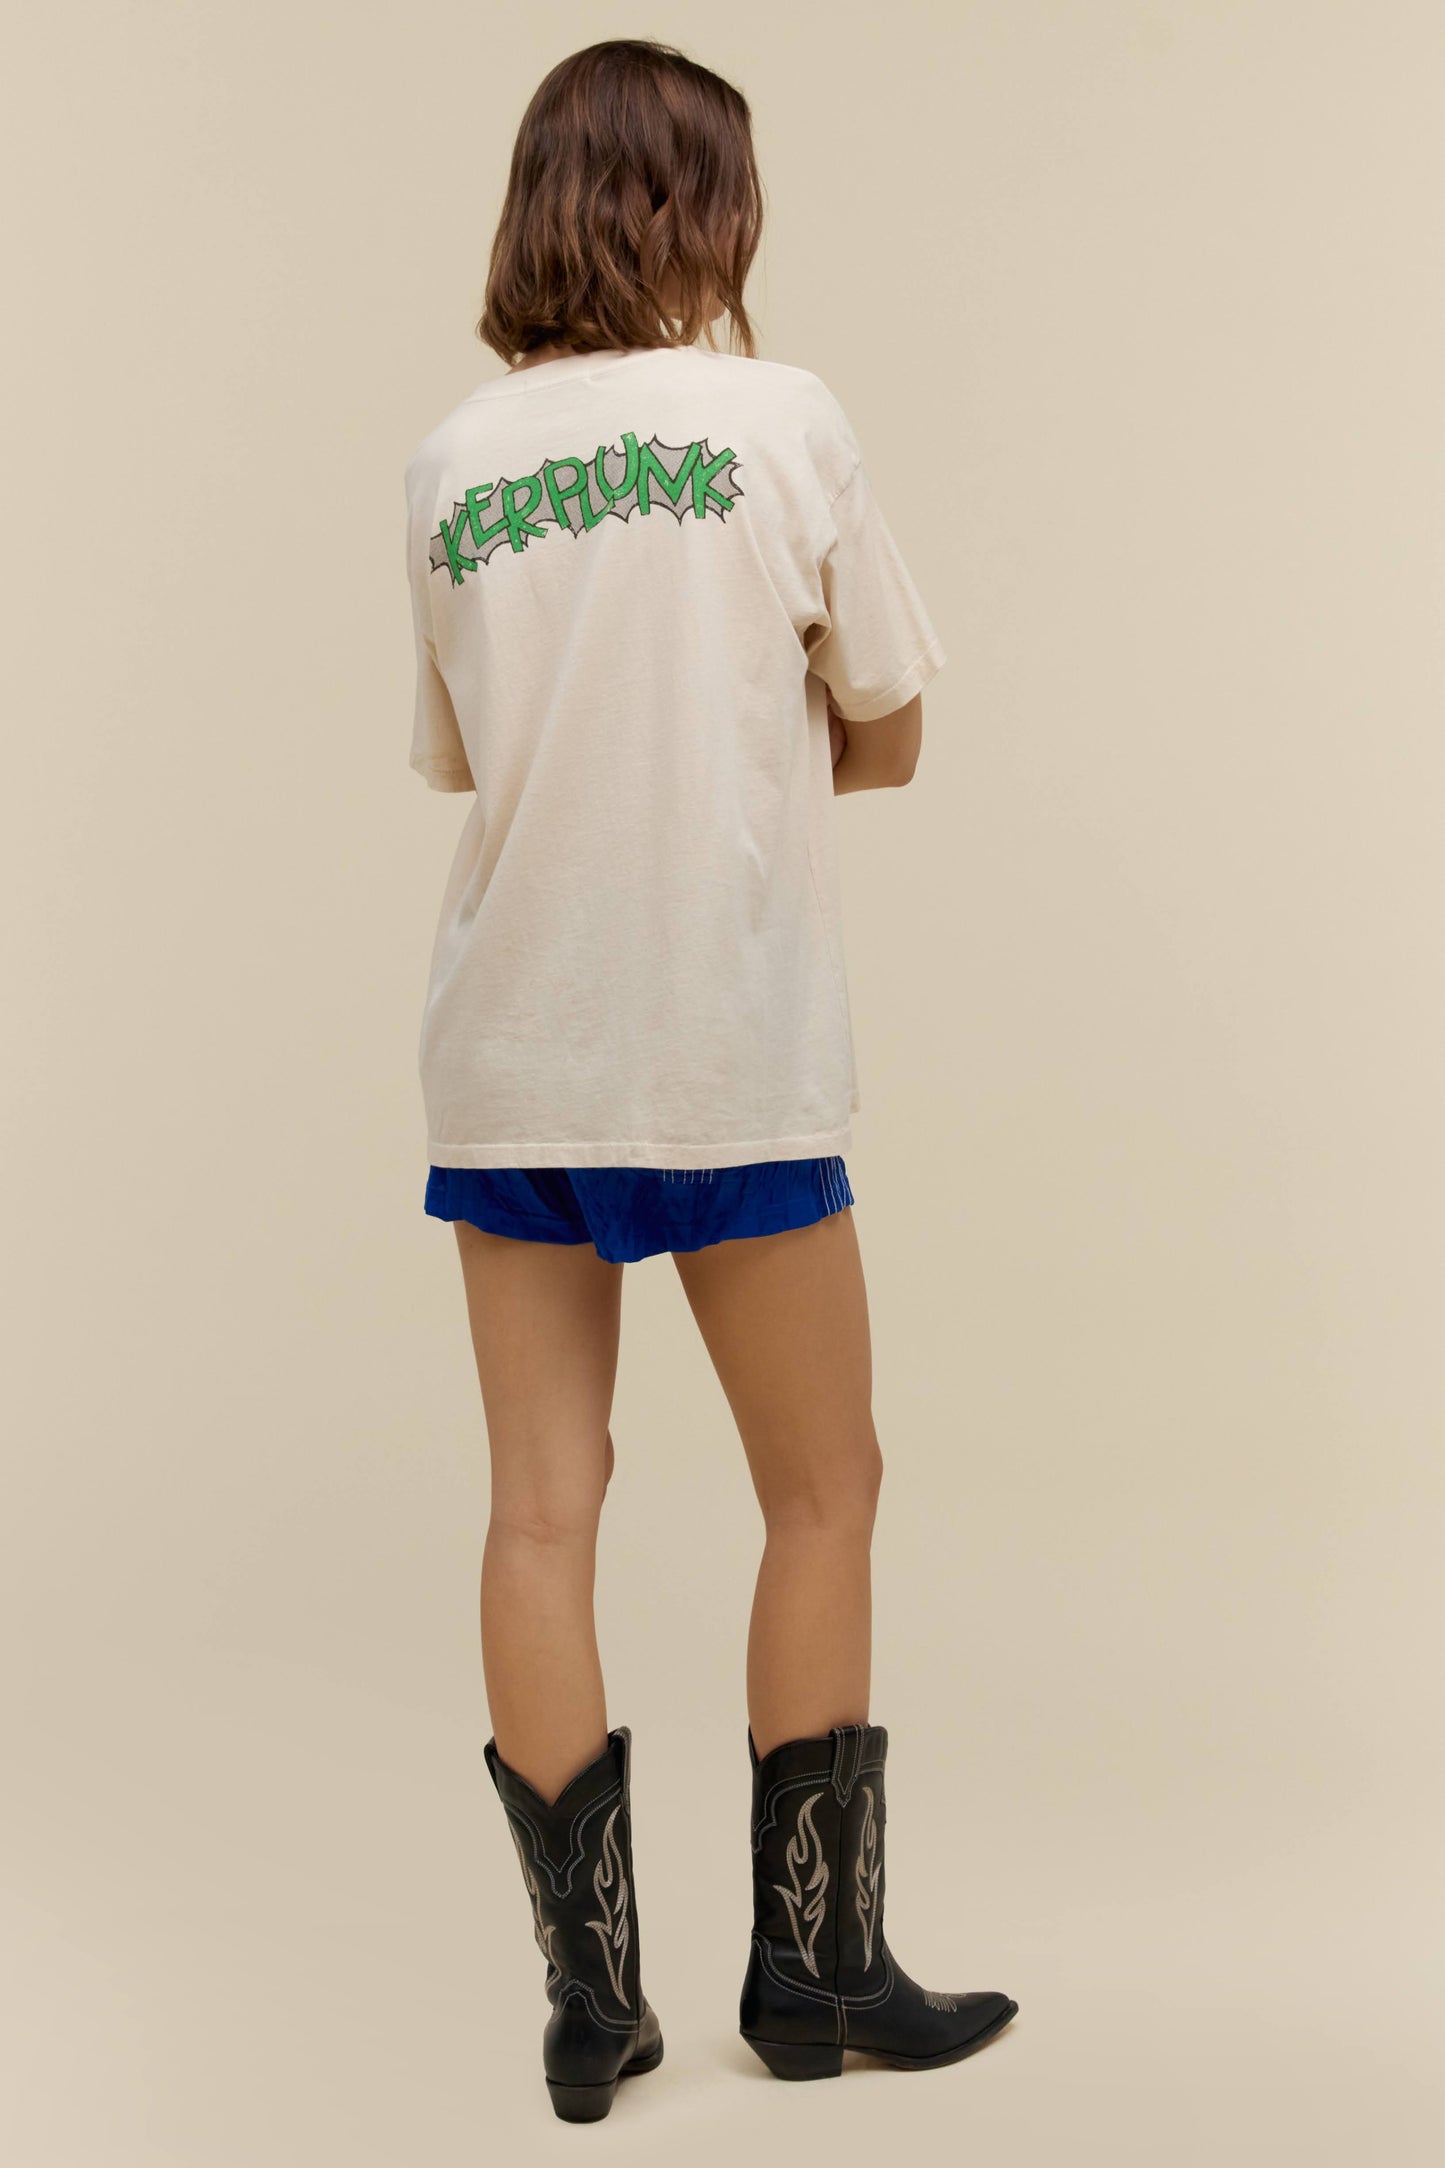 A model featuring a white tee stamped with 'Green Day' and a graphic flower pot in the middle.